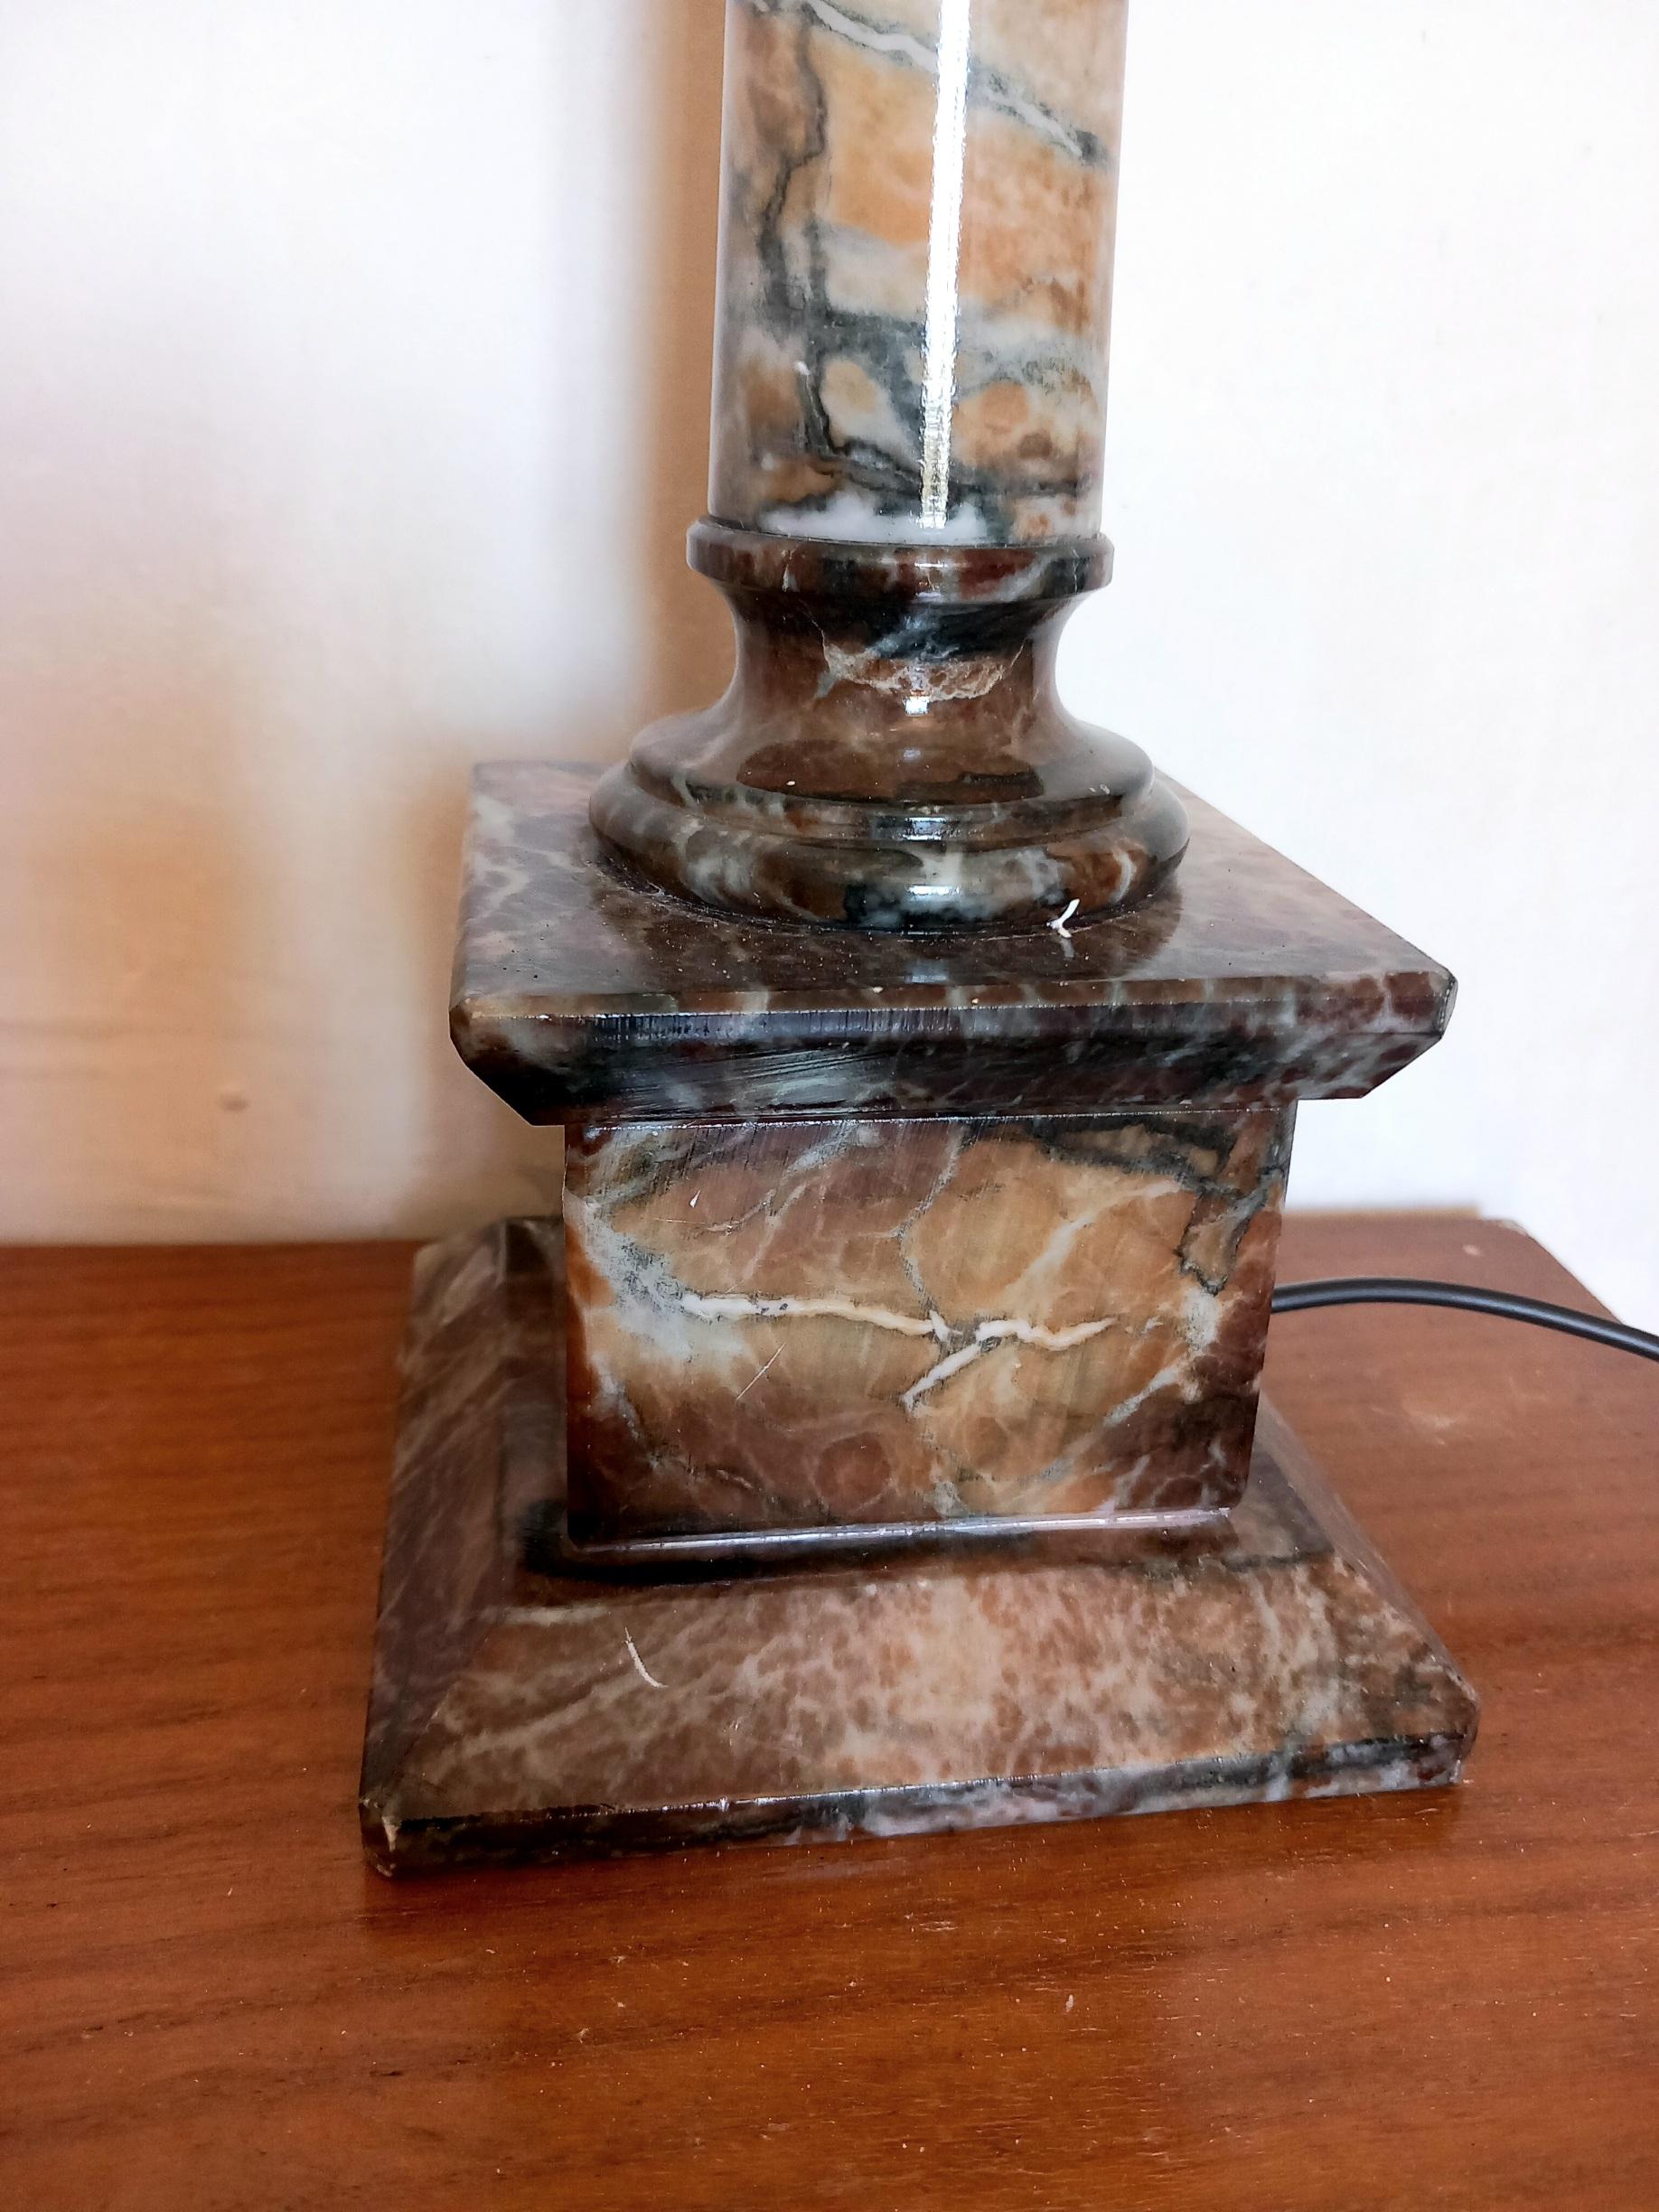 Table lamp alabaster.,It is in very good condition.

It is suitable to put on a side table in the living room or on a bedside table.

If the shipment is to the USA, it is sent with European to American plug adapter.

Beautiful Italian brown